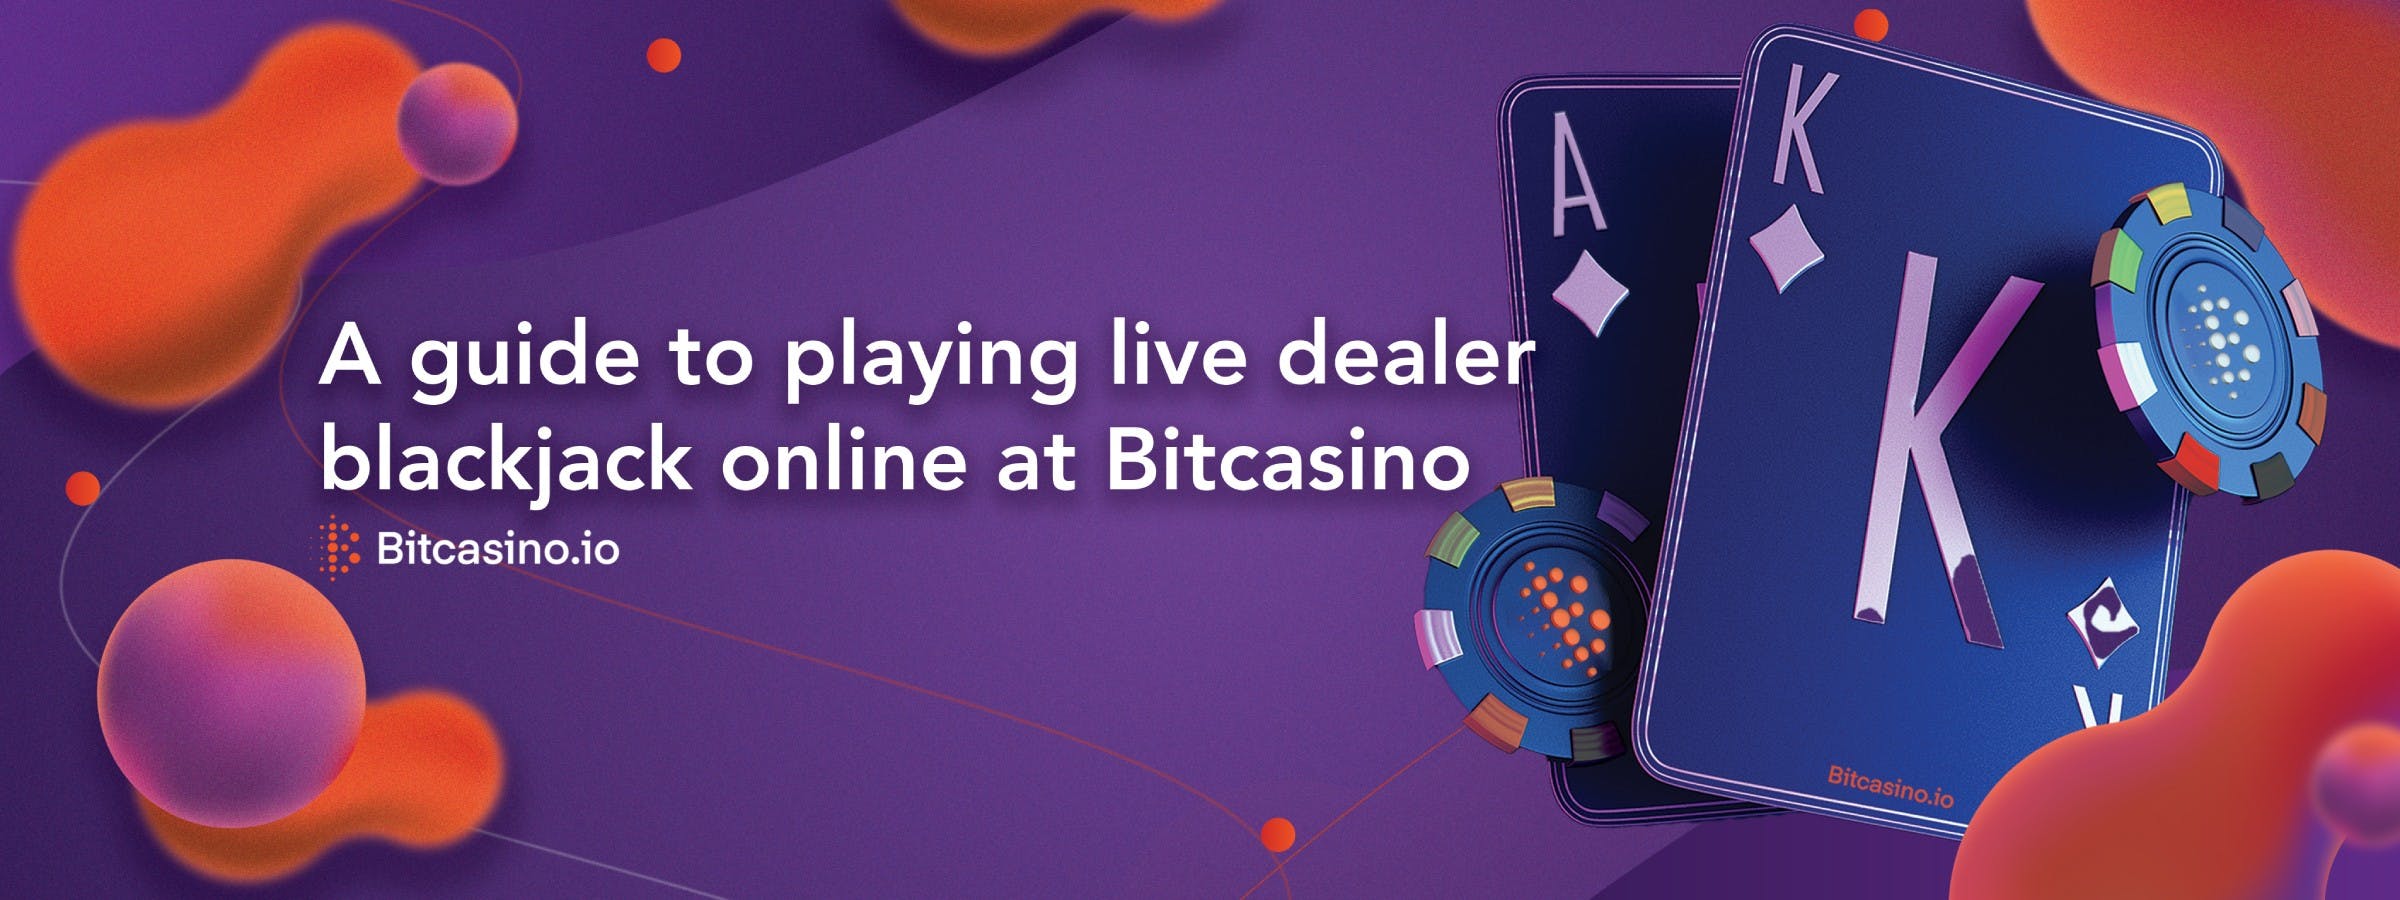 A guide to playing live dealer blackjack online at Bitcasino